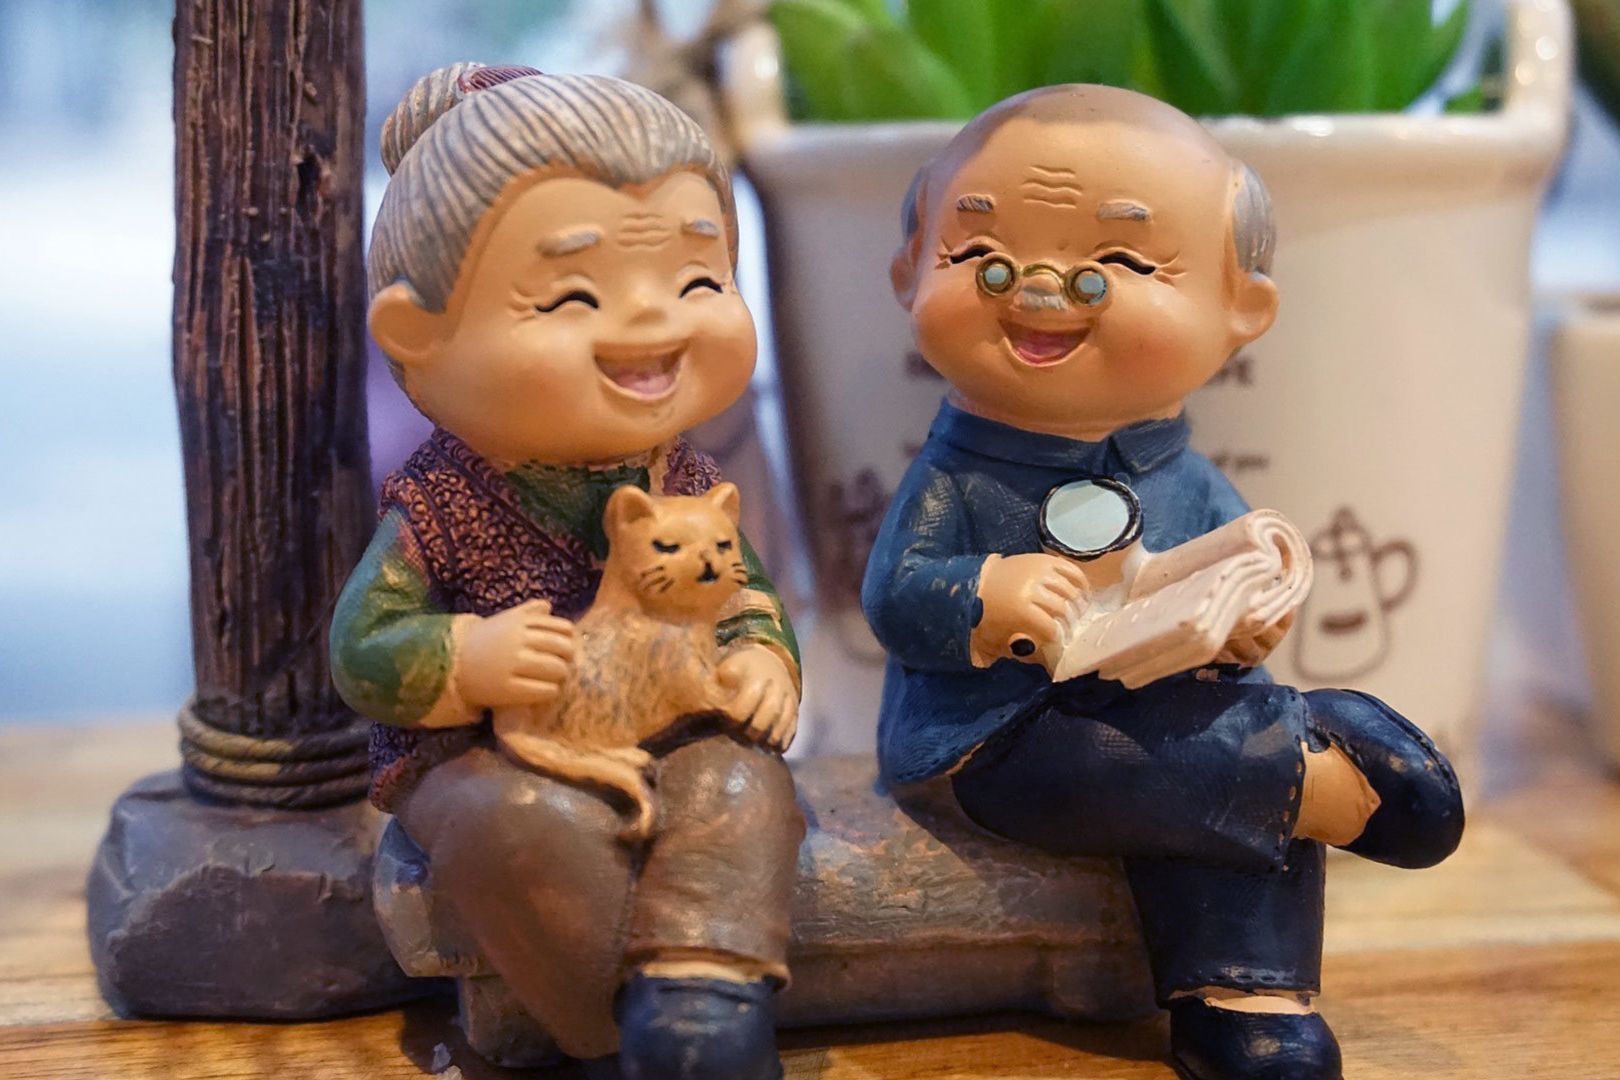 Figurines of an old woman holding a cat and an old man reading a book. It's so cute!